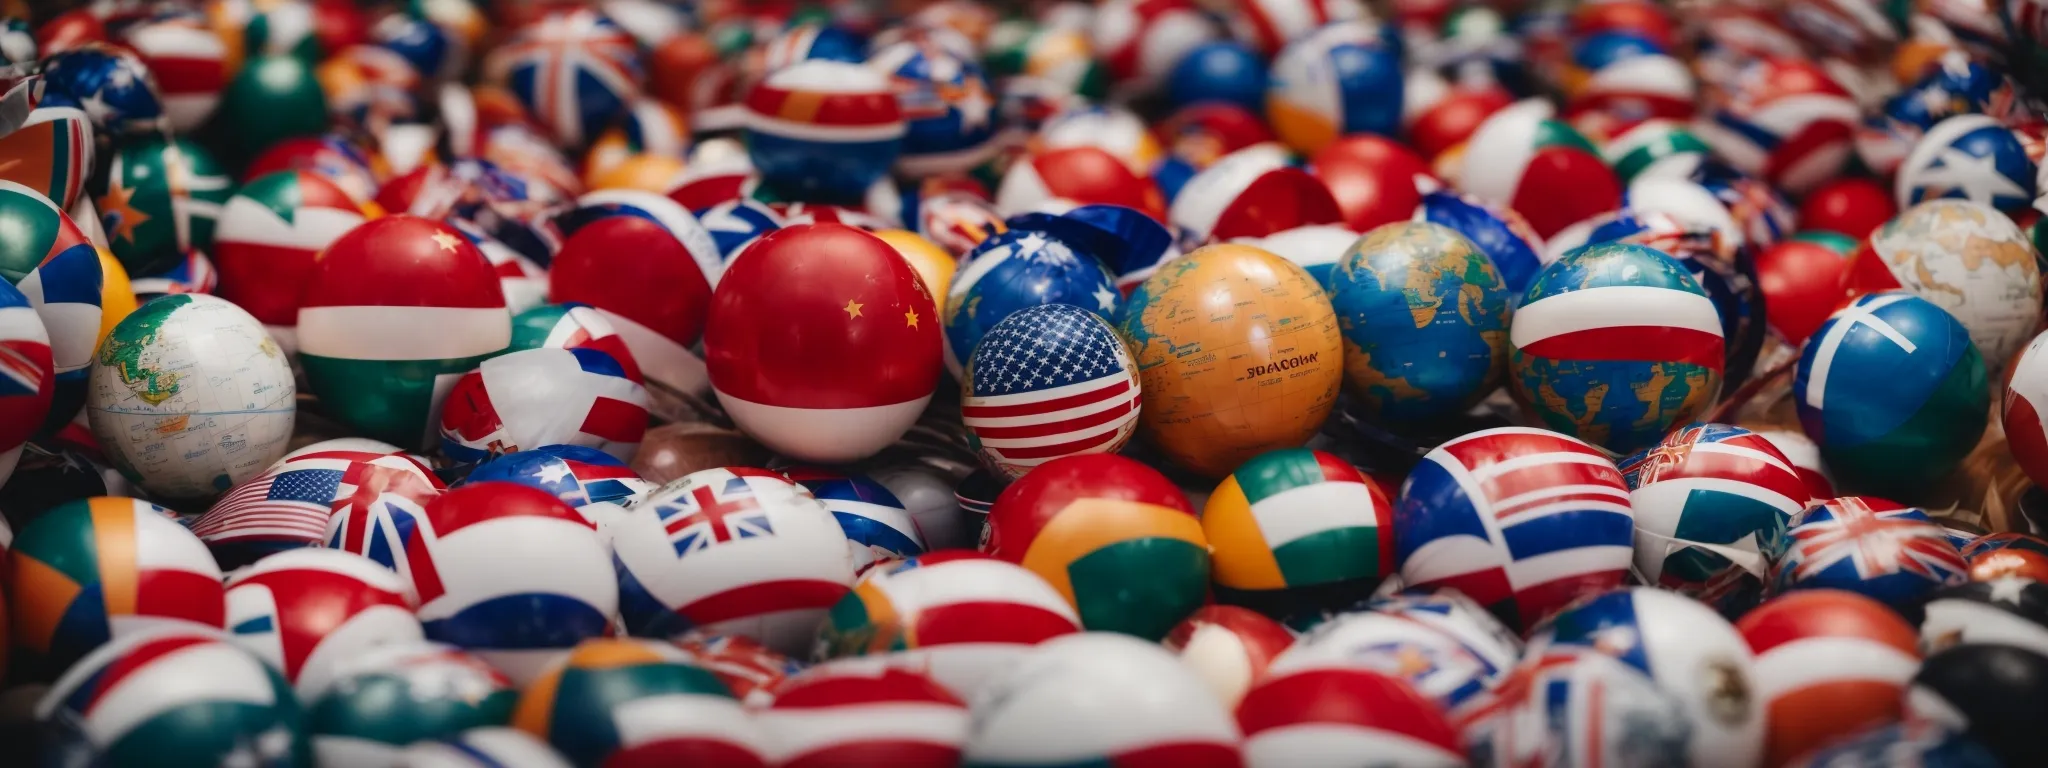 a globe centered on a table surrounded by various national flags, portraying the concept of global market research.